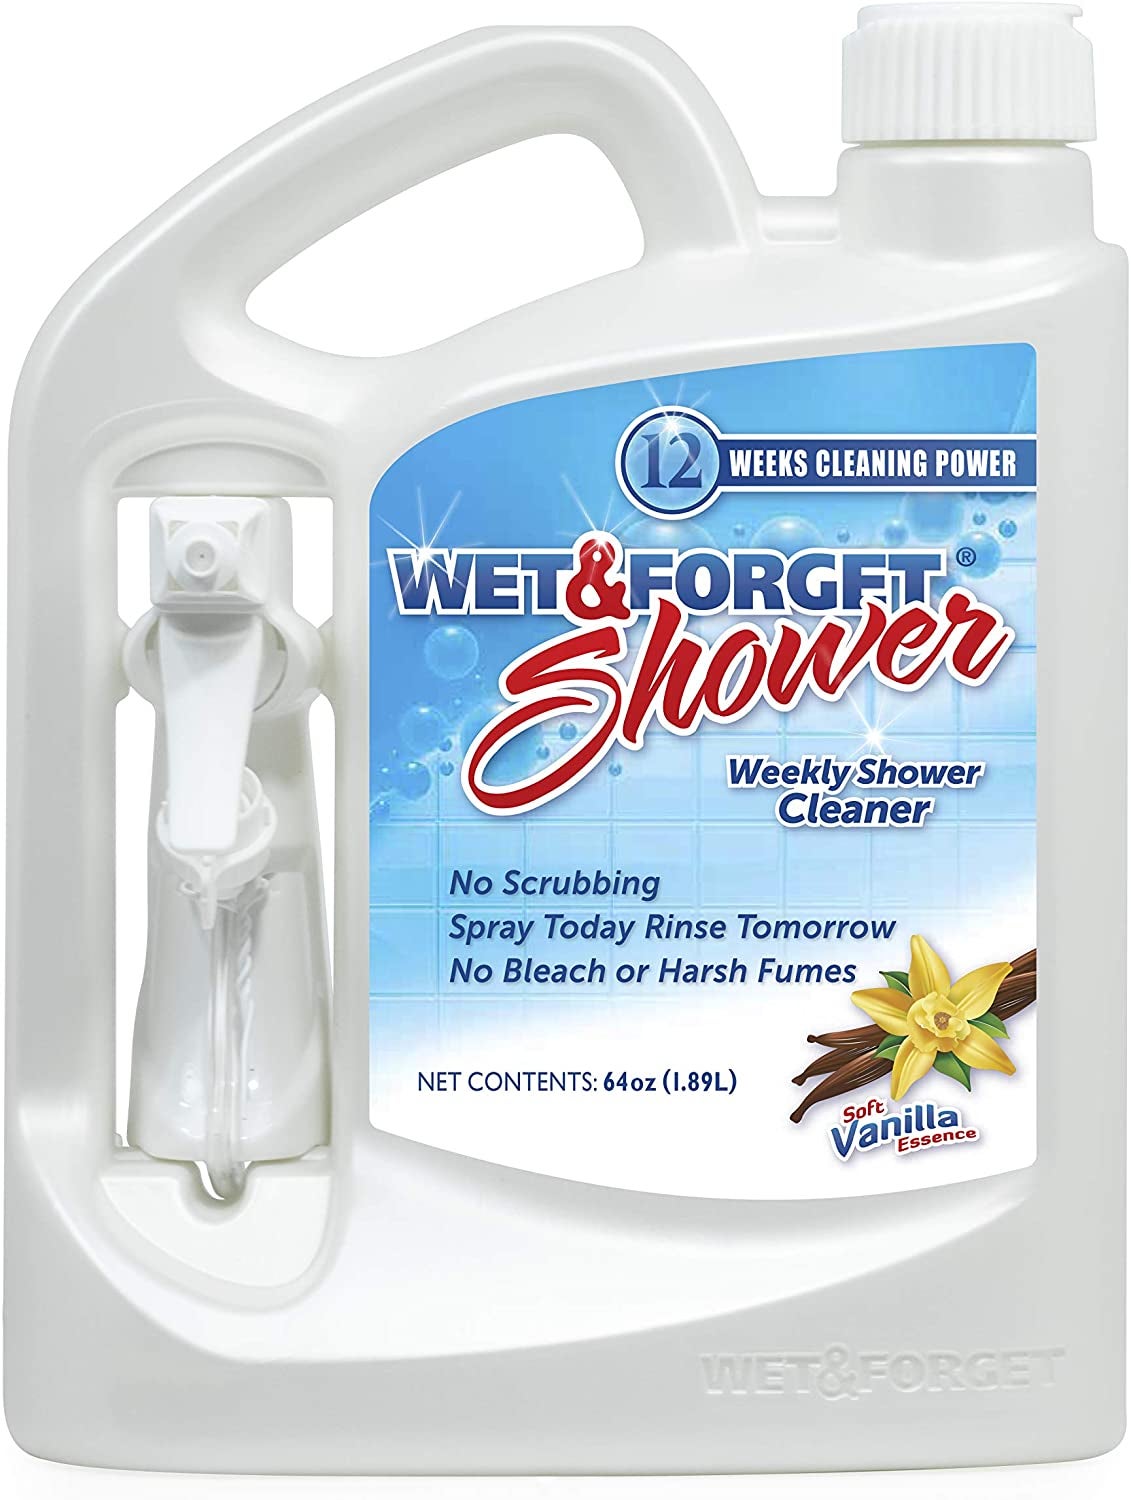 The Best Shower Cleaning Products to Deep Clean Your Shower